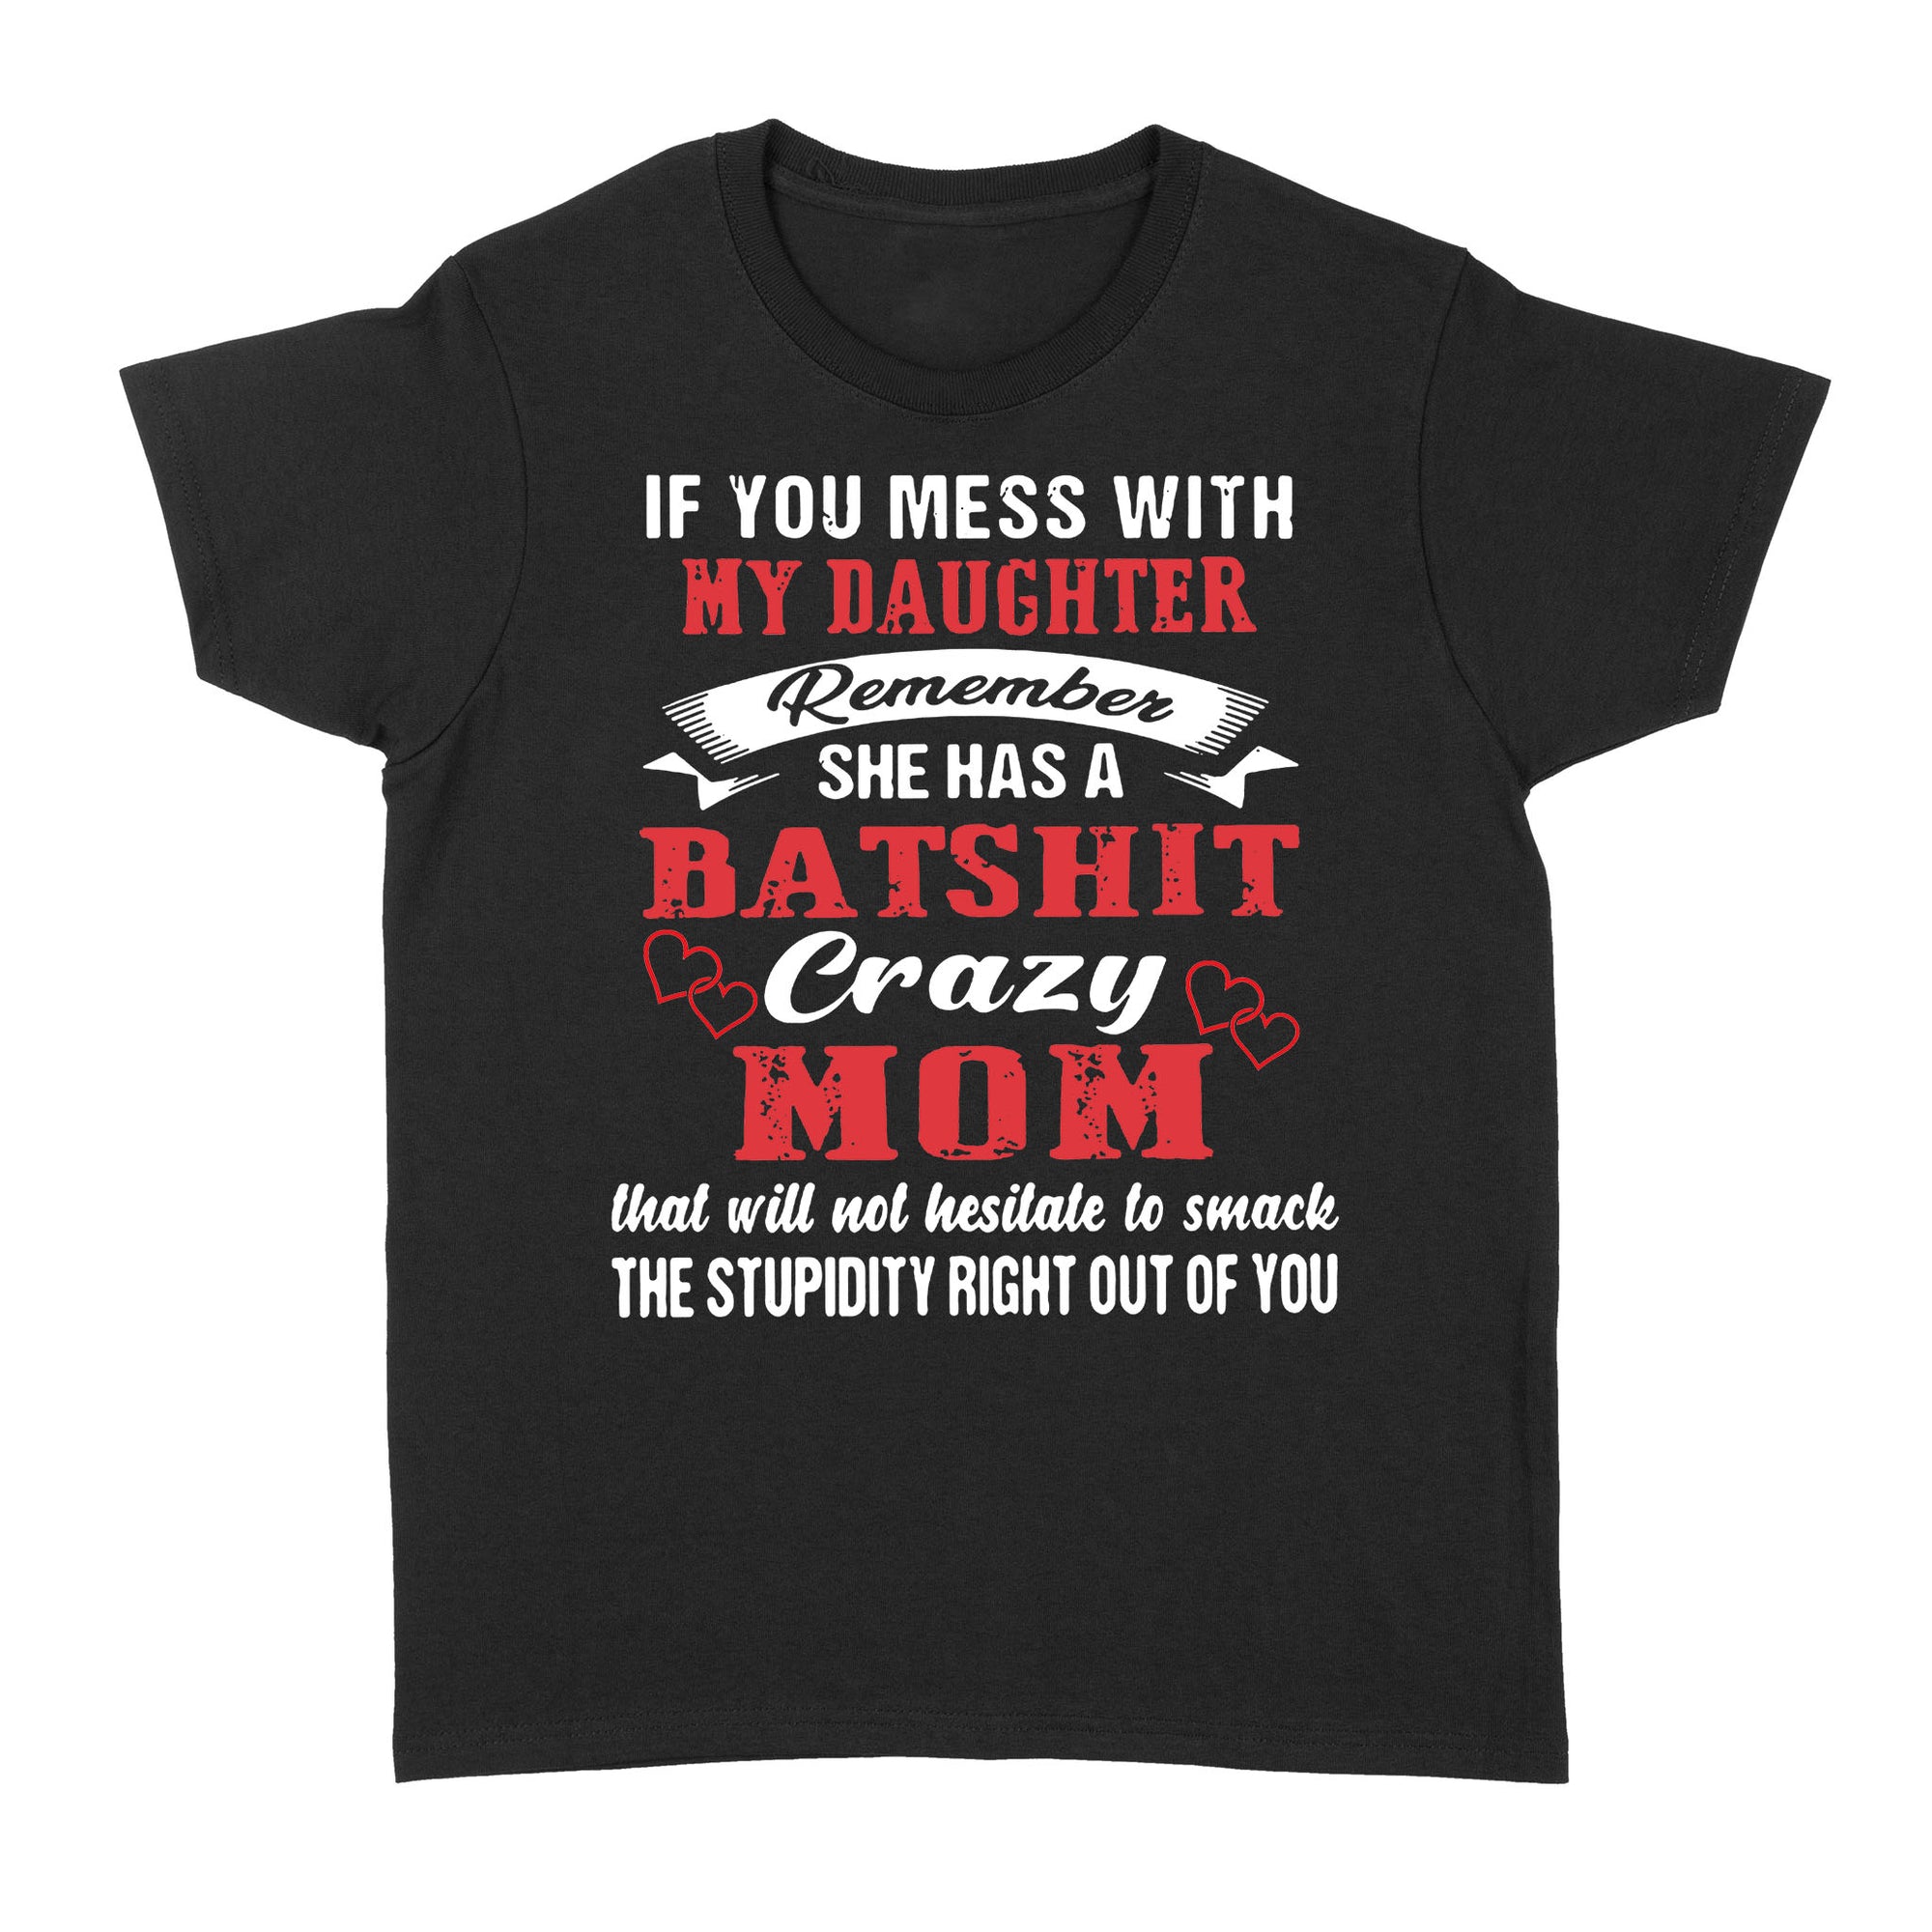 If You Mess With My Daughter Remember She Has A Batshit Crazy Mom That Will Not Hesitate To Smack The Stupidity Right Out Of You - Standard Women's T-shirt